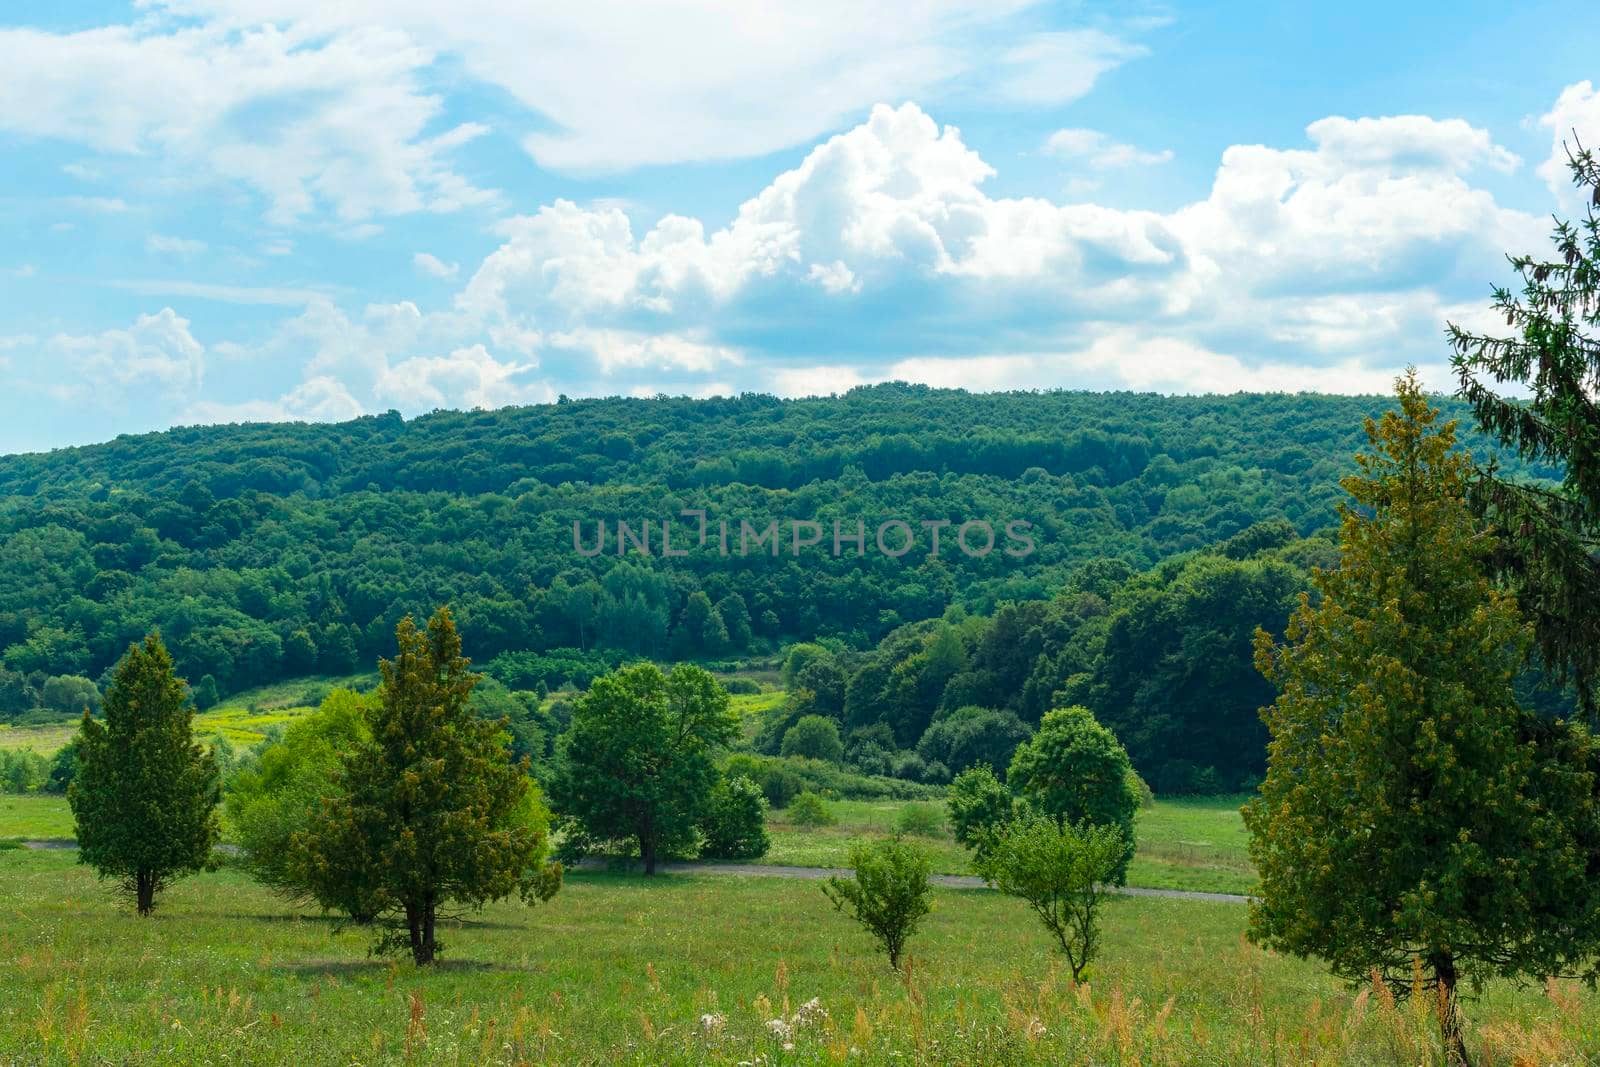 Northern Hungary mountain range with pine forest. Green Bükk Mountains at summer. Blue cumulus sky and grassy field.